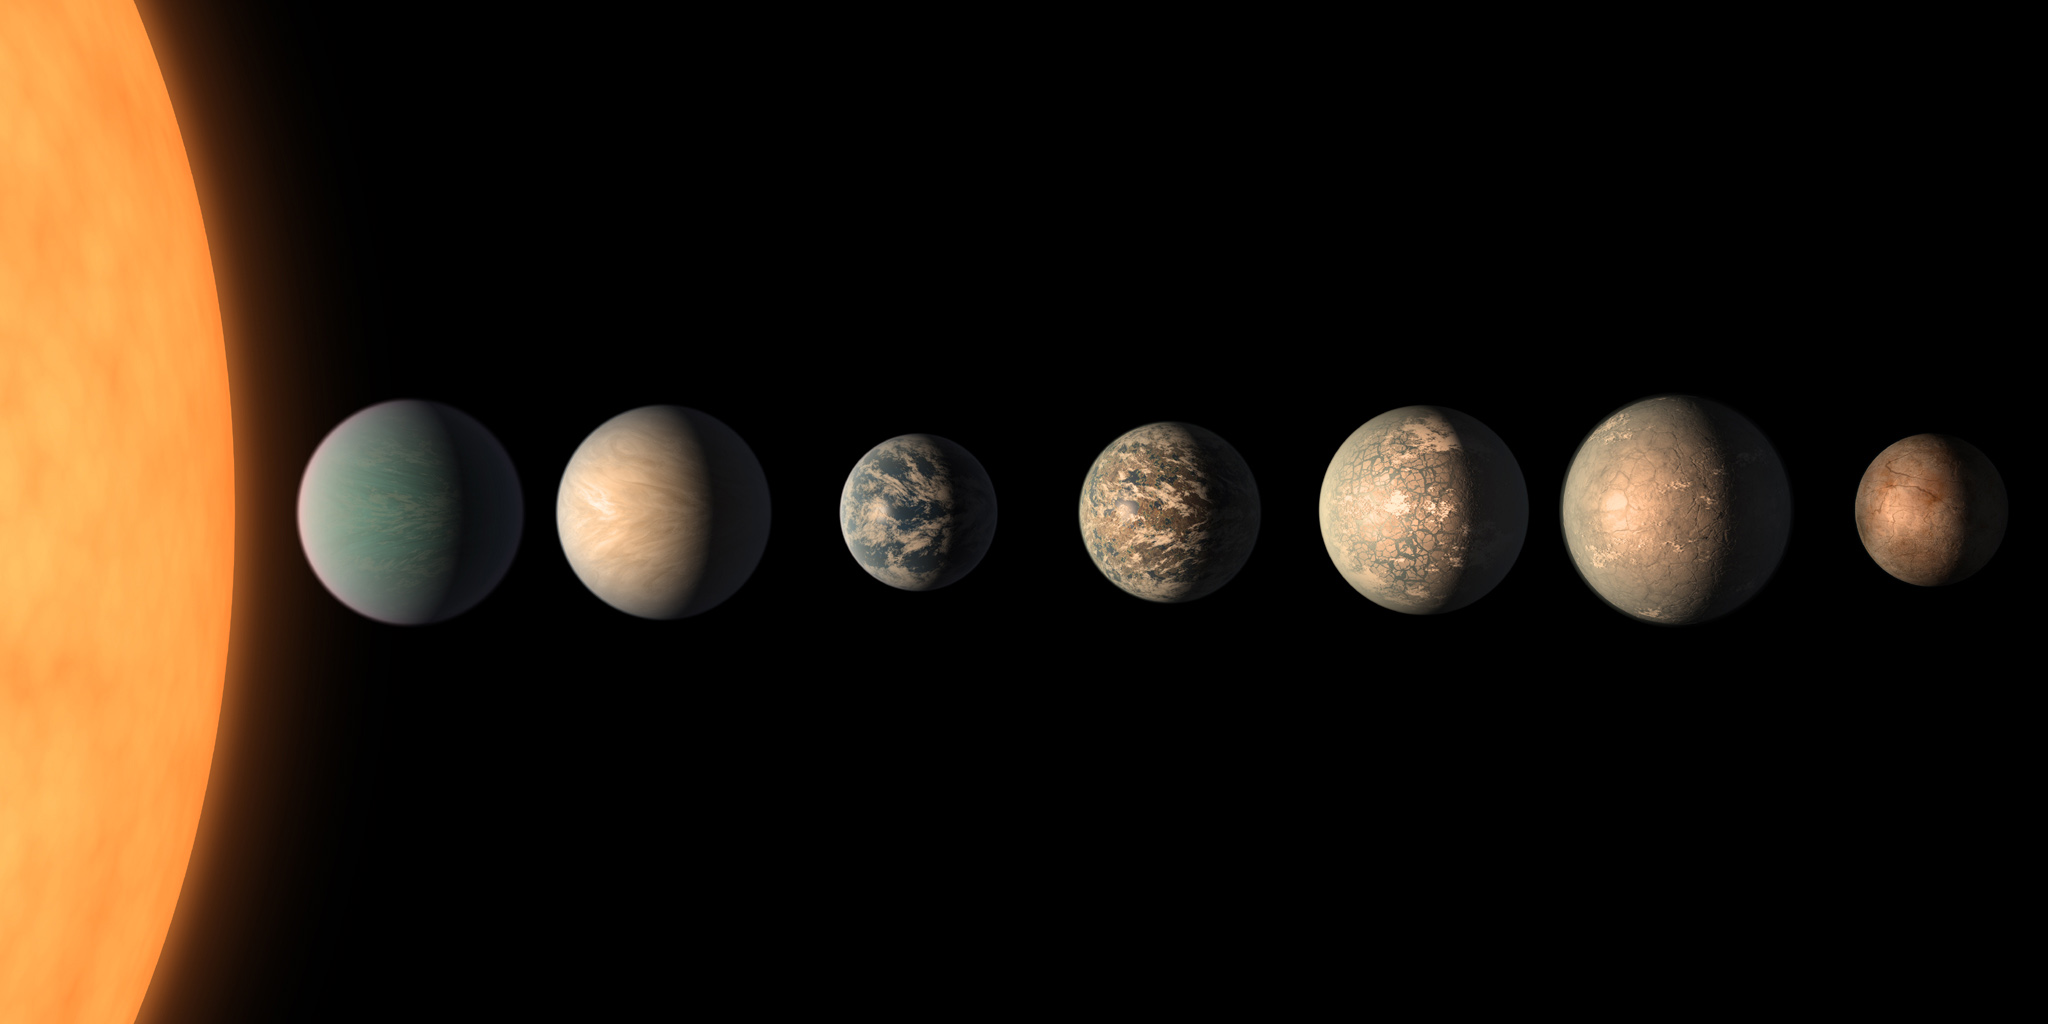 This artist's concept shows what the TRAPPIST-1 planetary system might look like, based on available data about the planets' diameters, masses and distances from the host star, as of February 2018. Image Credit: NASA/JPL-Caltech